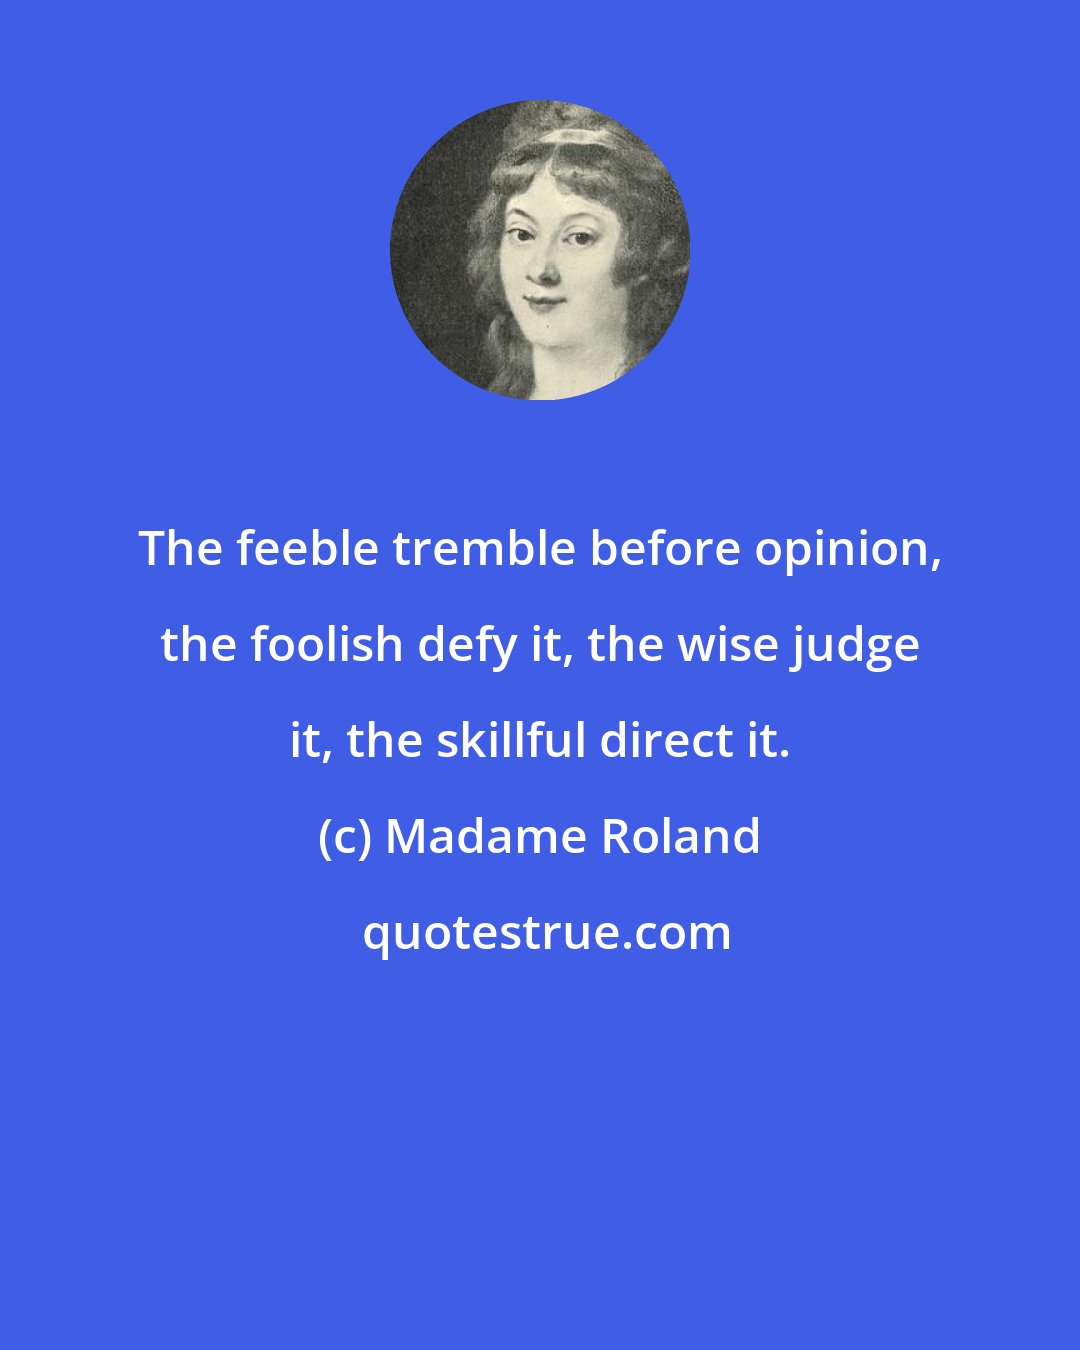 Madame Roland: The feeble tremble before opinion, the foolish defy it, the wise judge it, the skillful direct it.